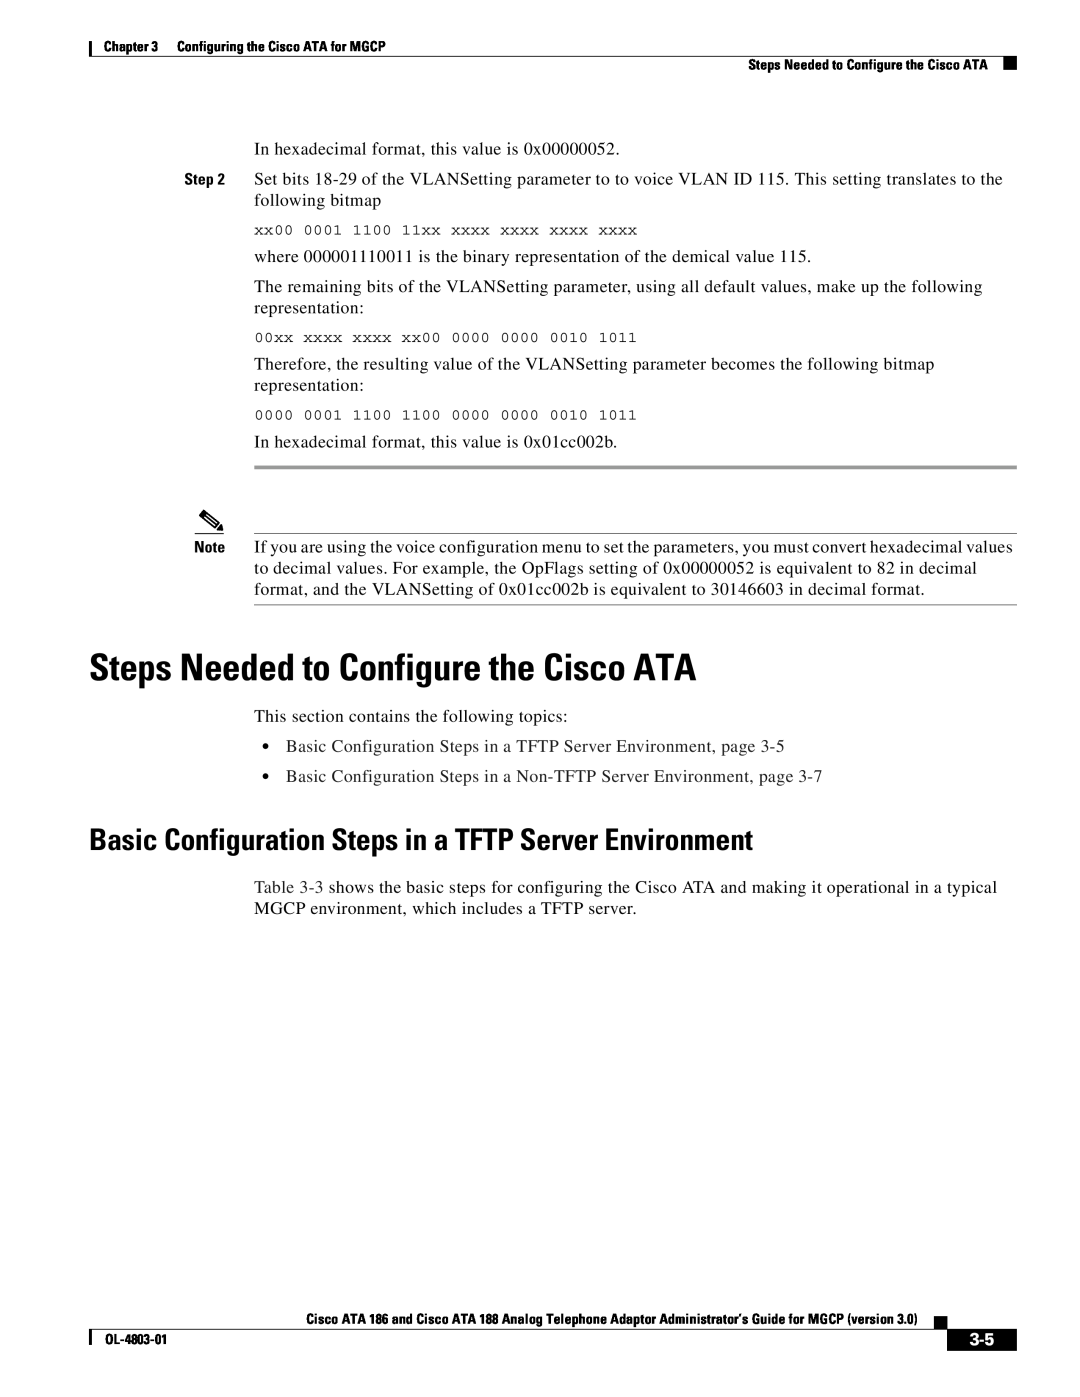 Cisco Systems ATA 186 Steps Needed to Configure the Cisco ATA, Basic Configuration Steps in a TFTP Server Environment 